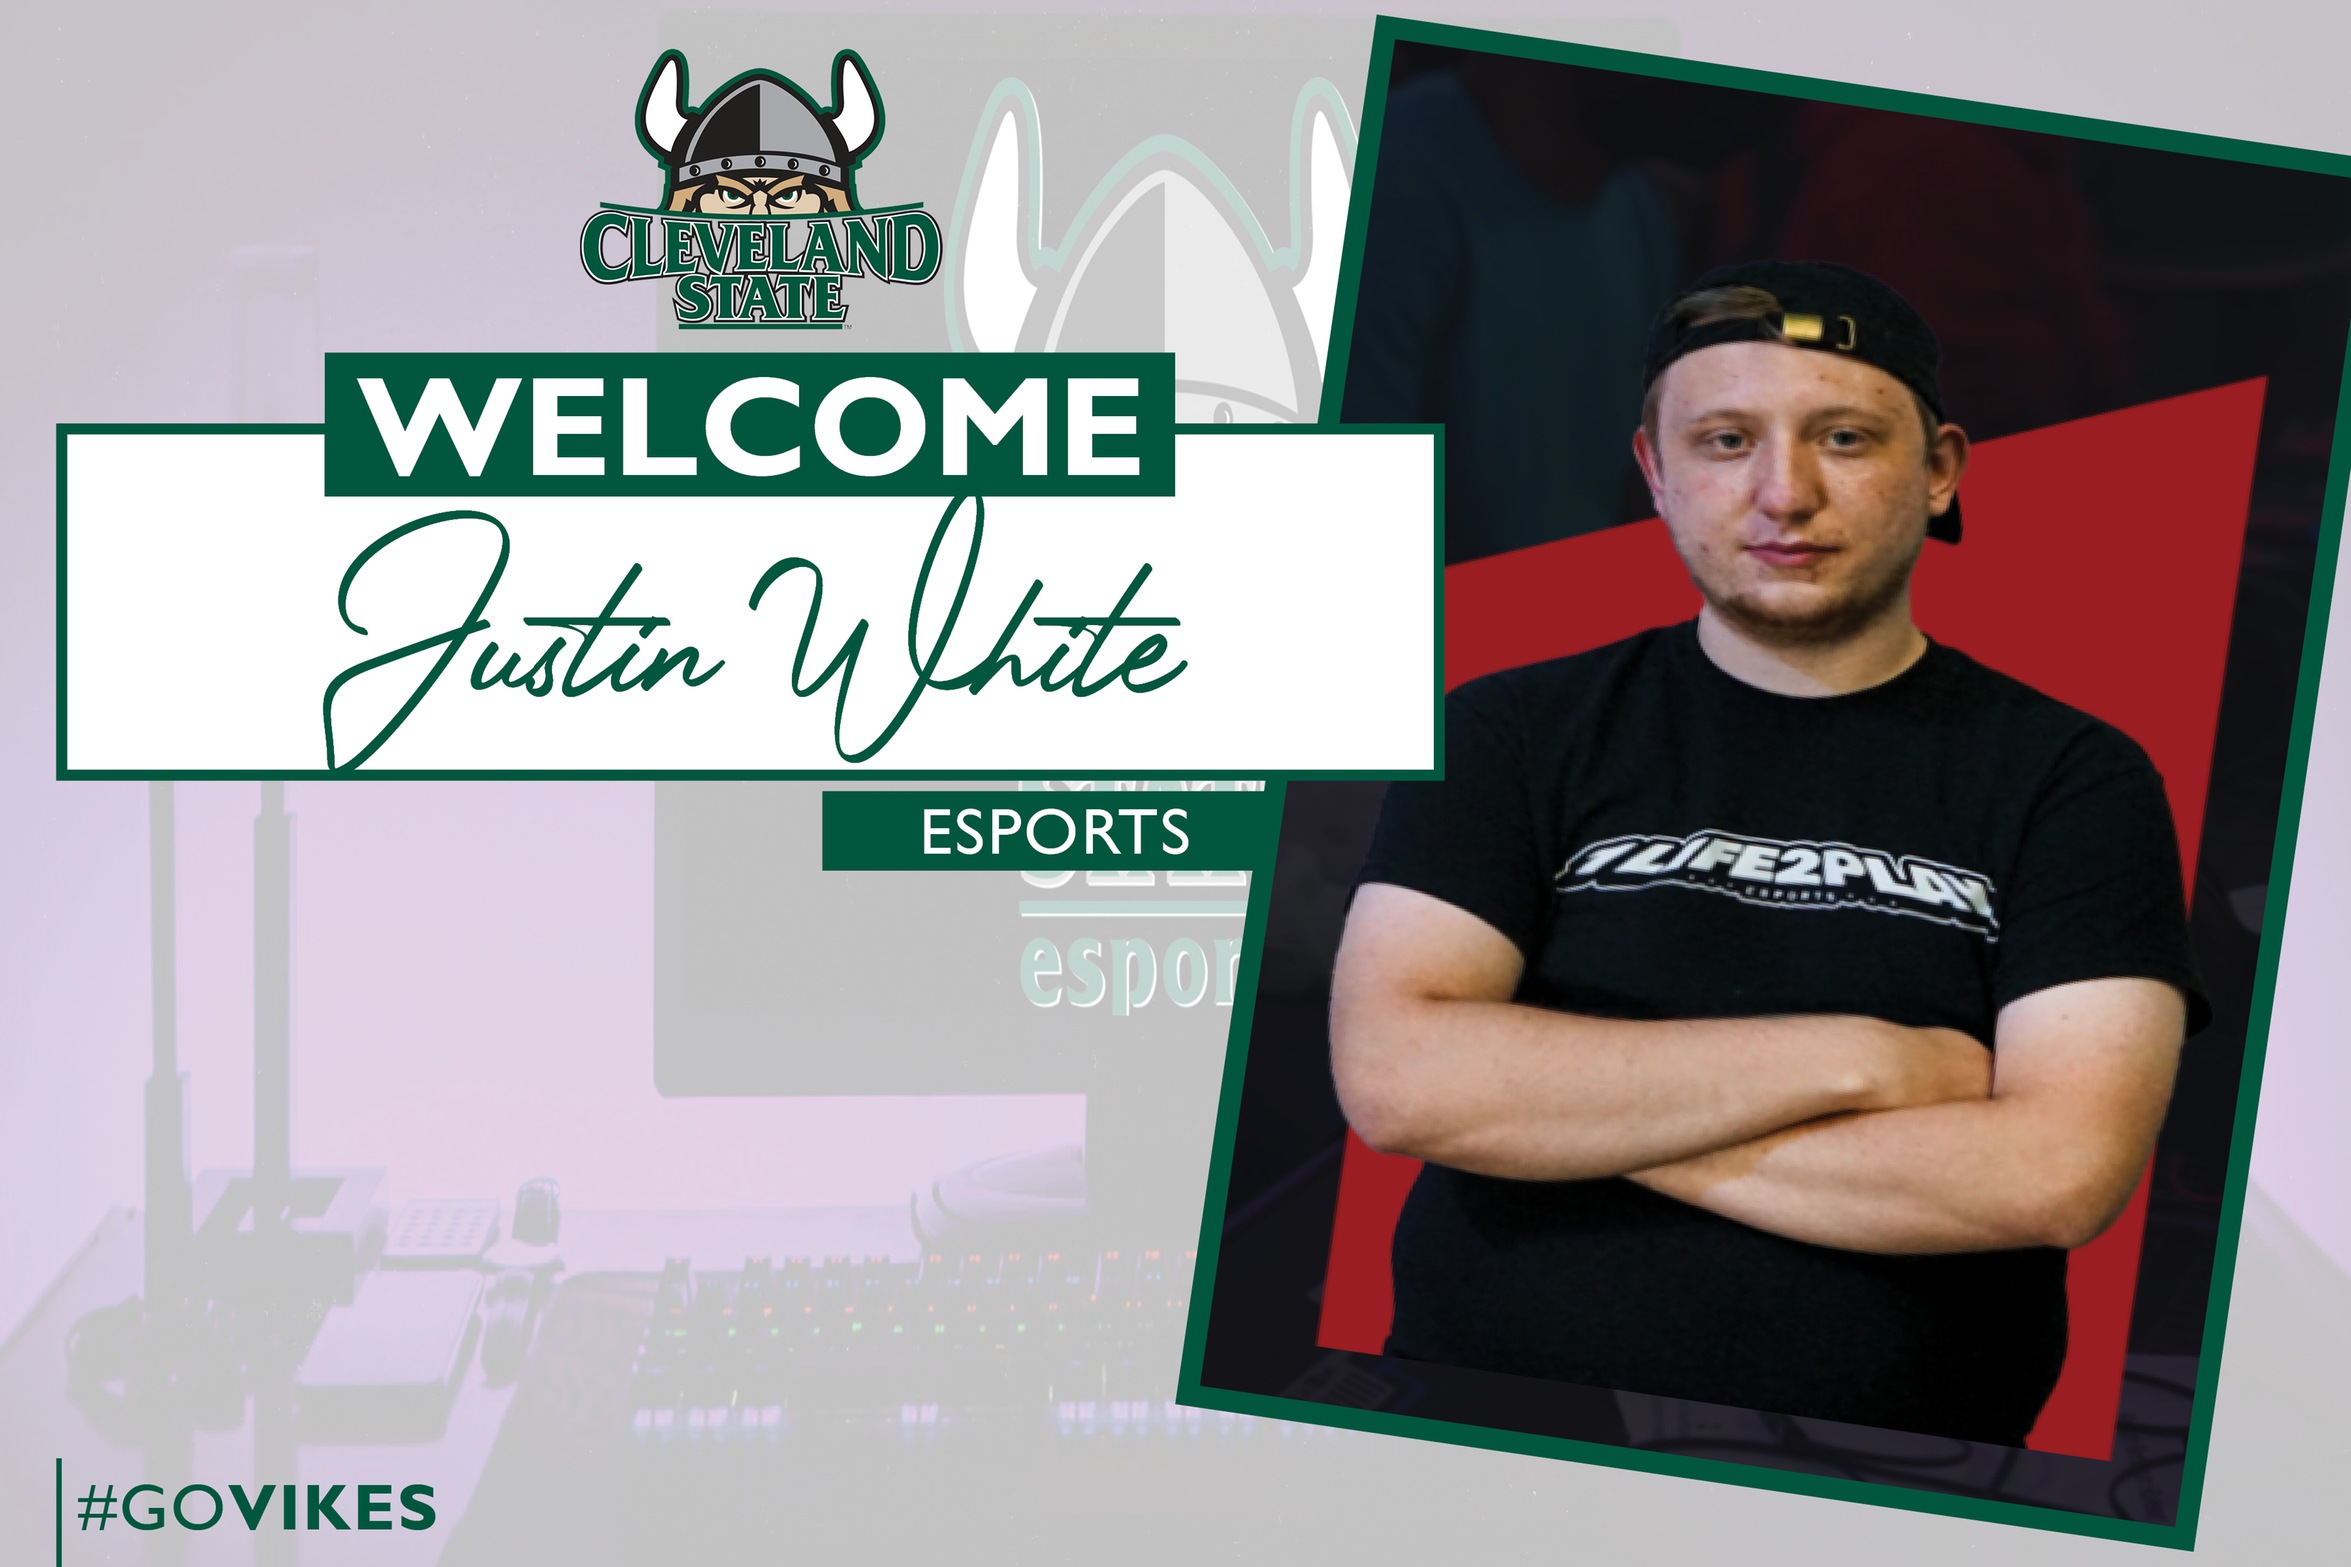 Cleveland State Esports Adds Justin White